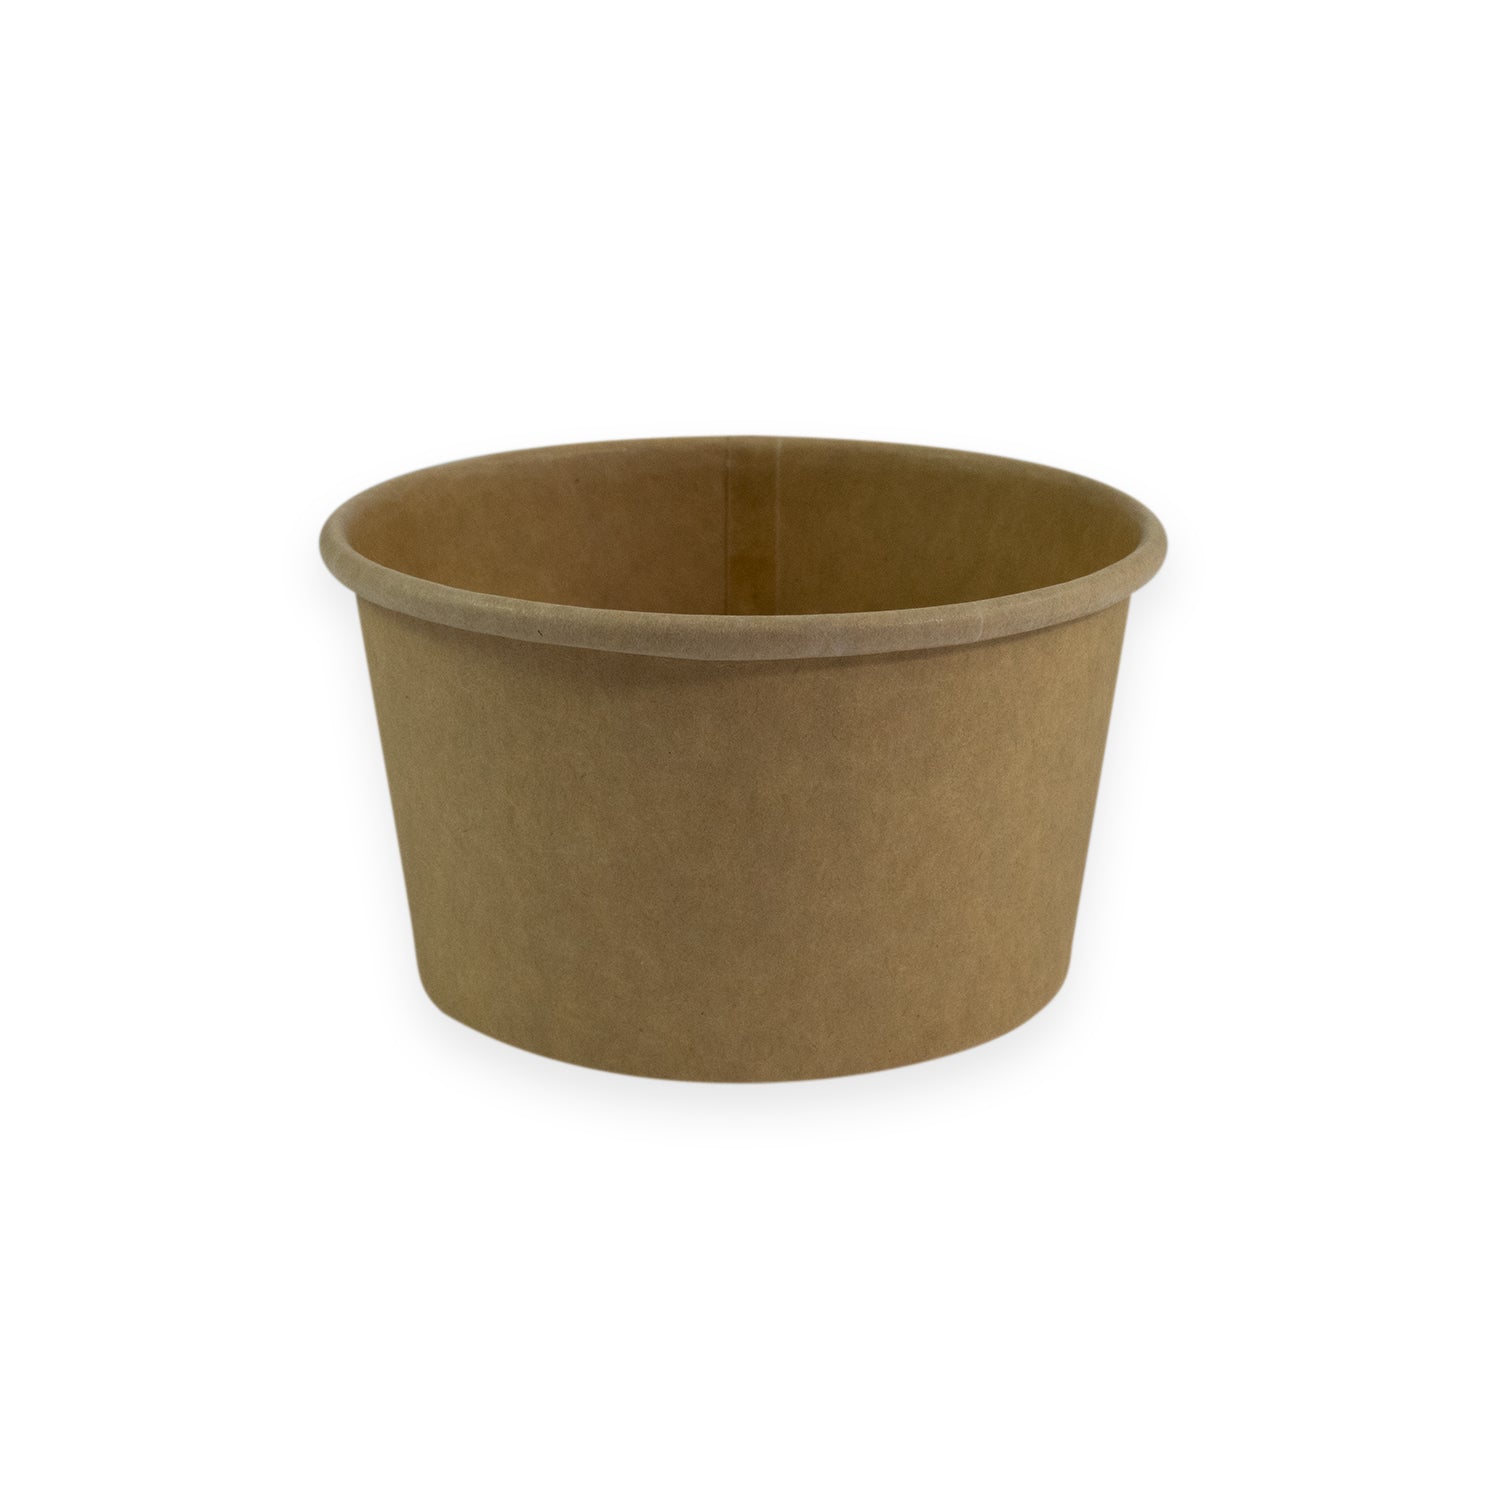 Sustain Sustain Paper Round Bowl/Container Kraft Brown 12oz 115mm - CT/500 Disposable Food Packaging  